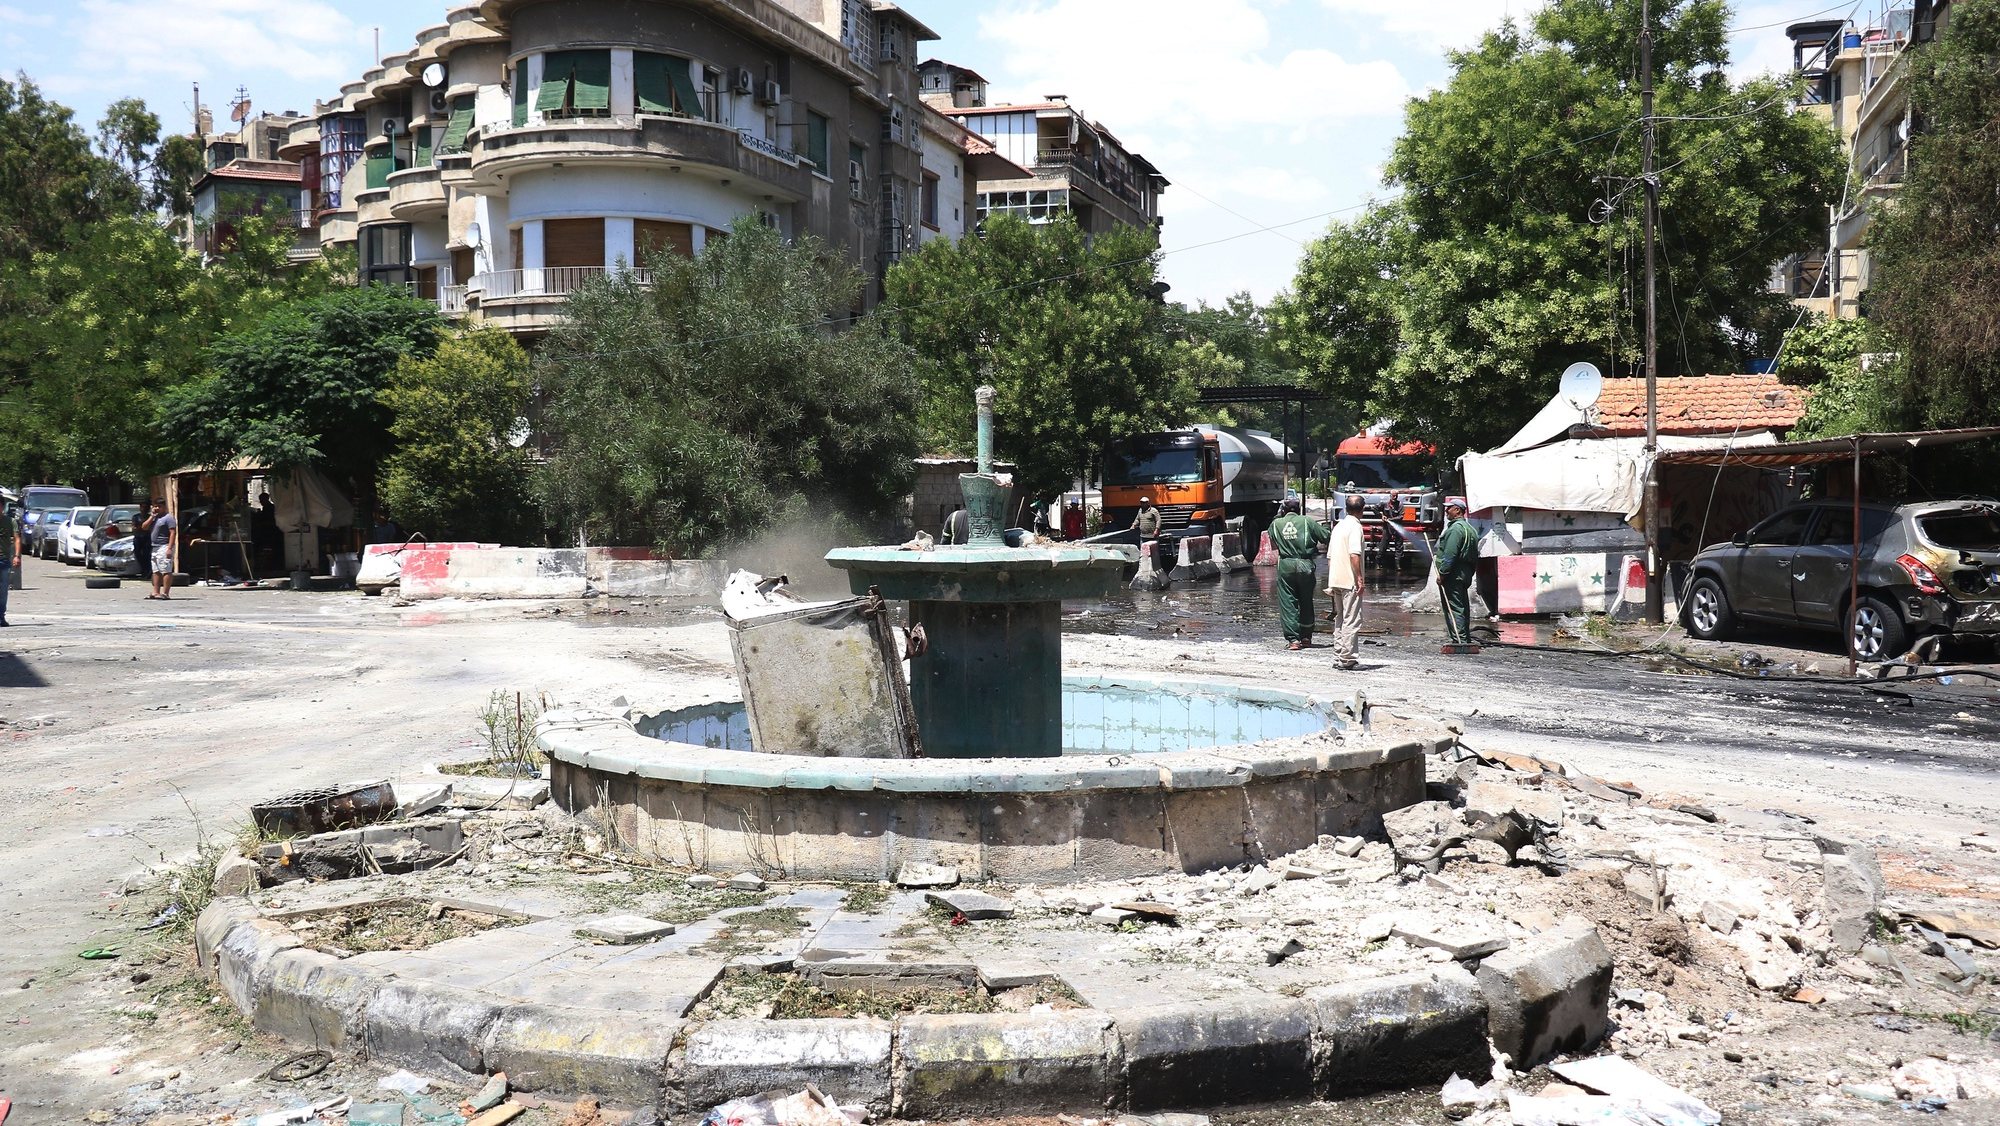 epa06061458 A general view of a damaged fountain near the site of a car bomb explosion in downtown Damascus, Syria, 02 July 2017. According to the state TV, three car bomb blasts rocked the capital  Damascus on 02 July that killed at least eight people and wounded a dozen others. It said that three car bombs went off at the Airport Road and al-Amara neighborhood in Damascus city. It indicated that the authorities chased the three cars and managed to intercept two of them near the entrance of Damascus city at the airport roundabout and destroyed them, but the third car managed to arrive in the capital and the suicide bomber on board detonated it, killing a number of people and injuring others.  EPA/YOUSSEF BADAWI